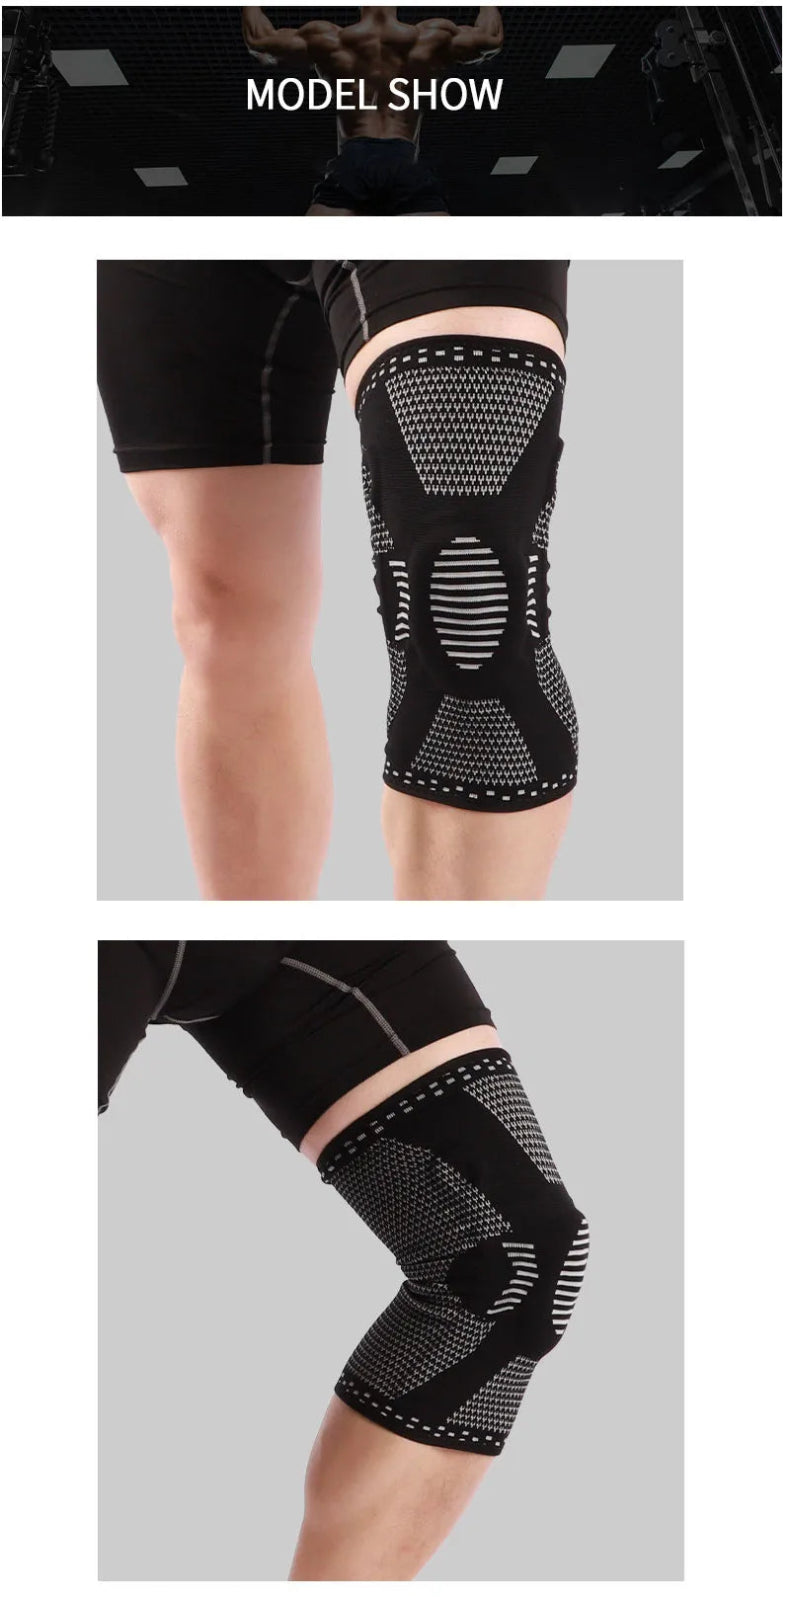 Vis - Care Knee Brace - Silicone knitting elastic compression knee protection